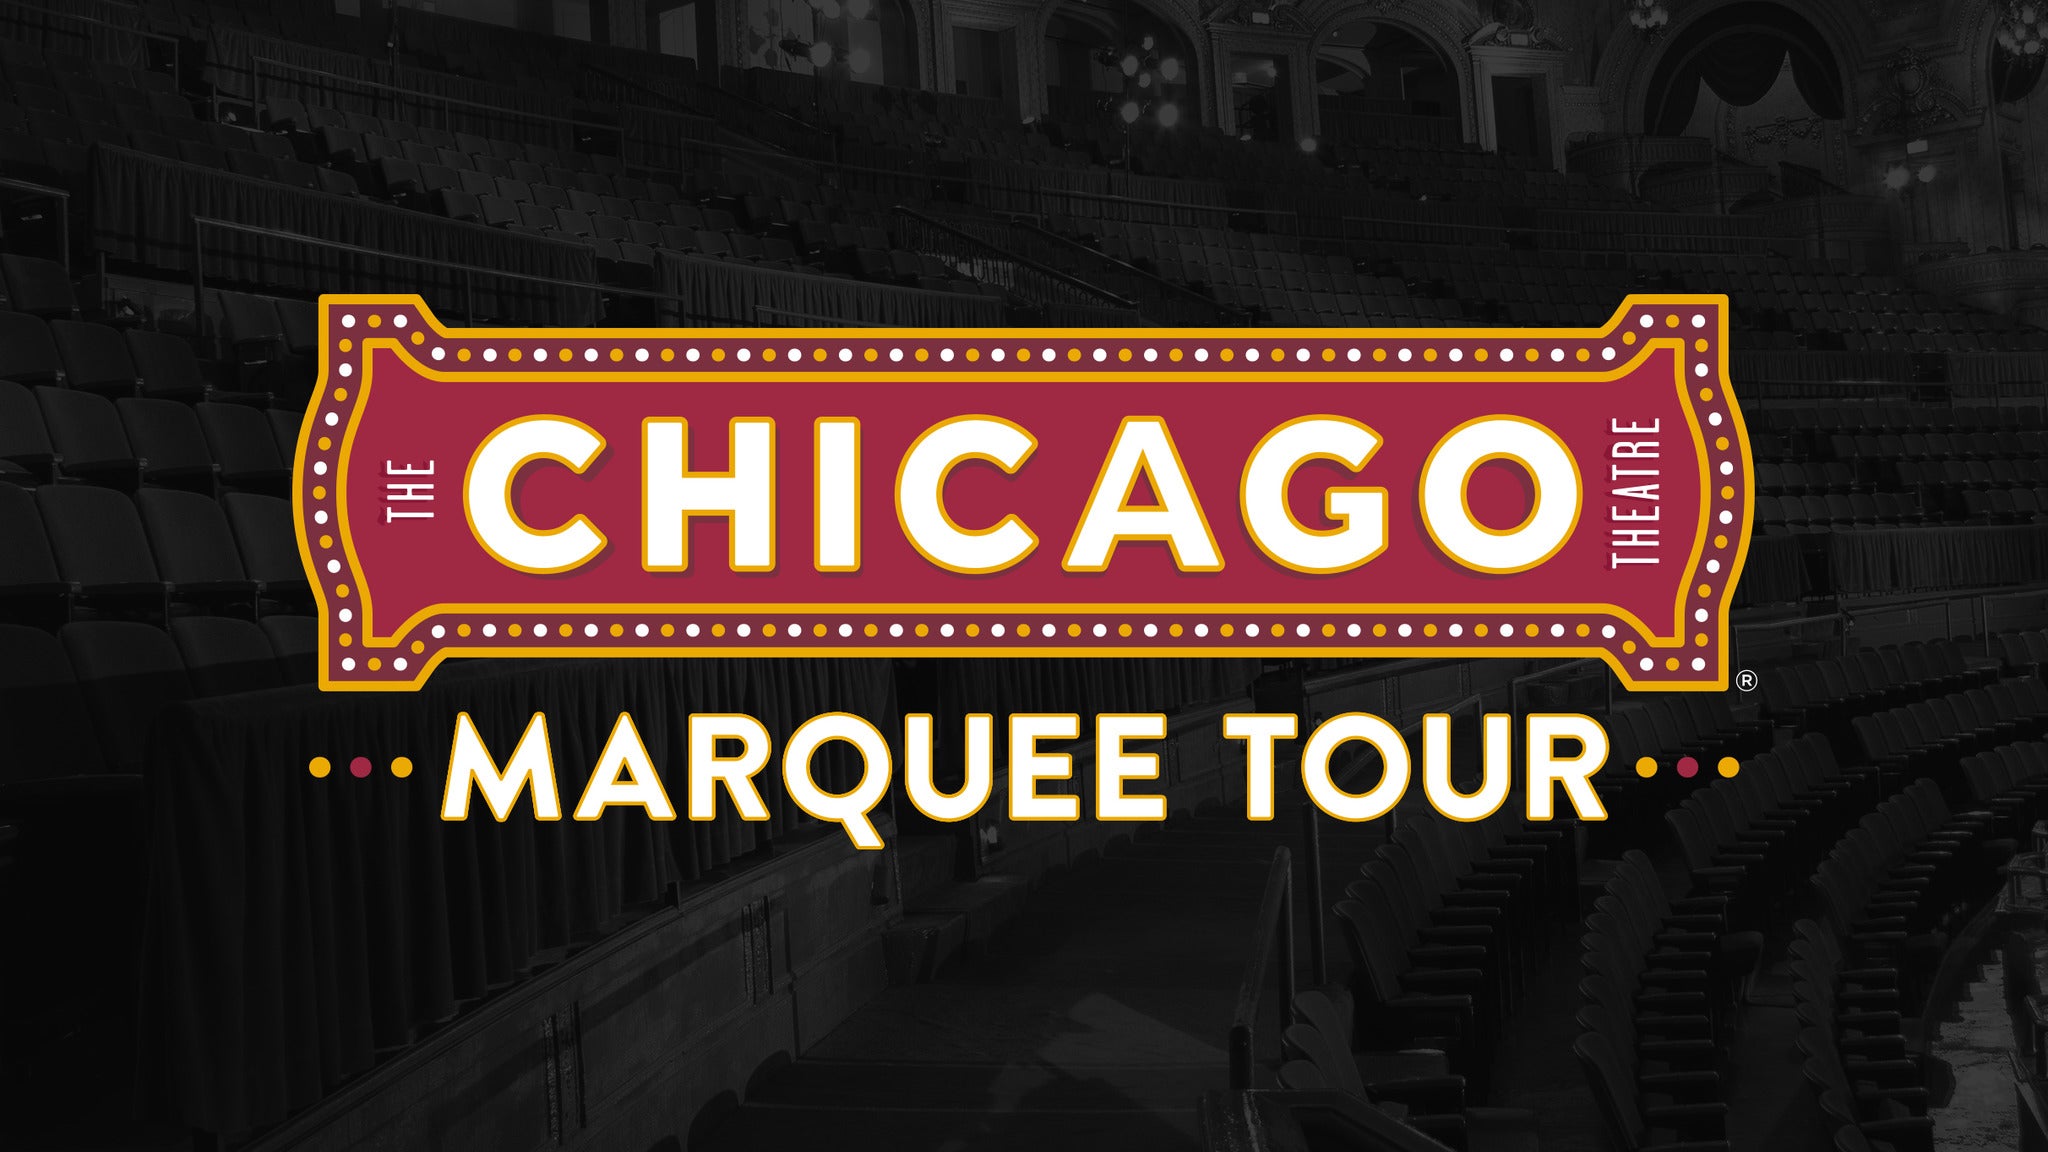 The Chicago Theatre Marquee Tour